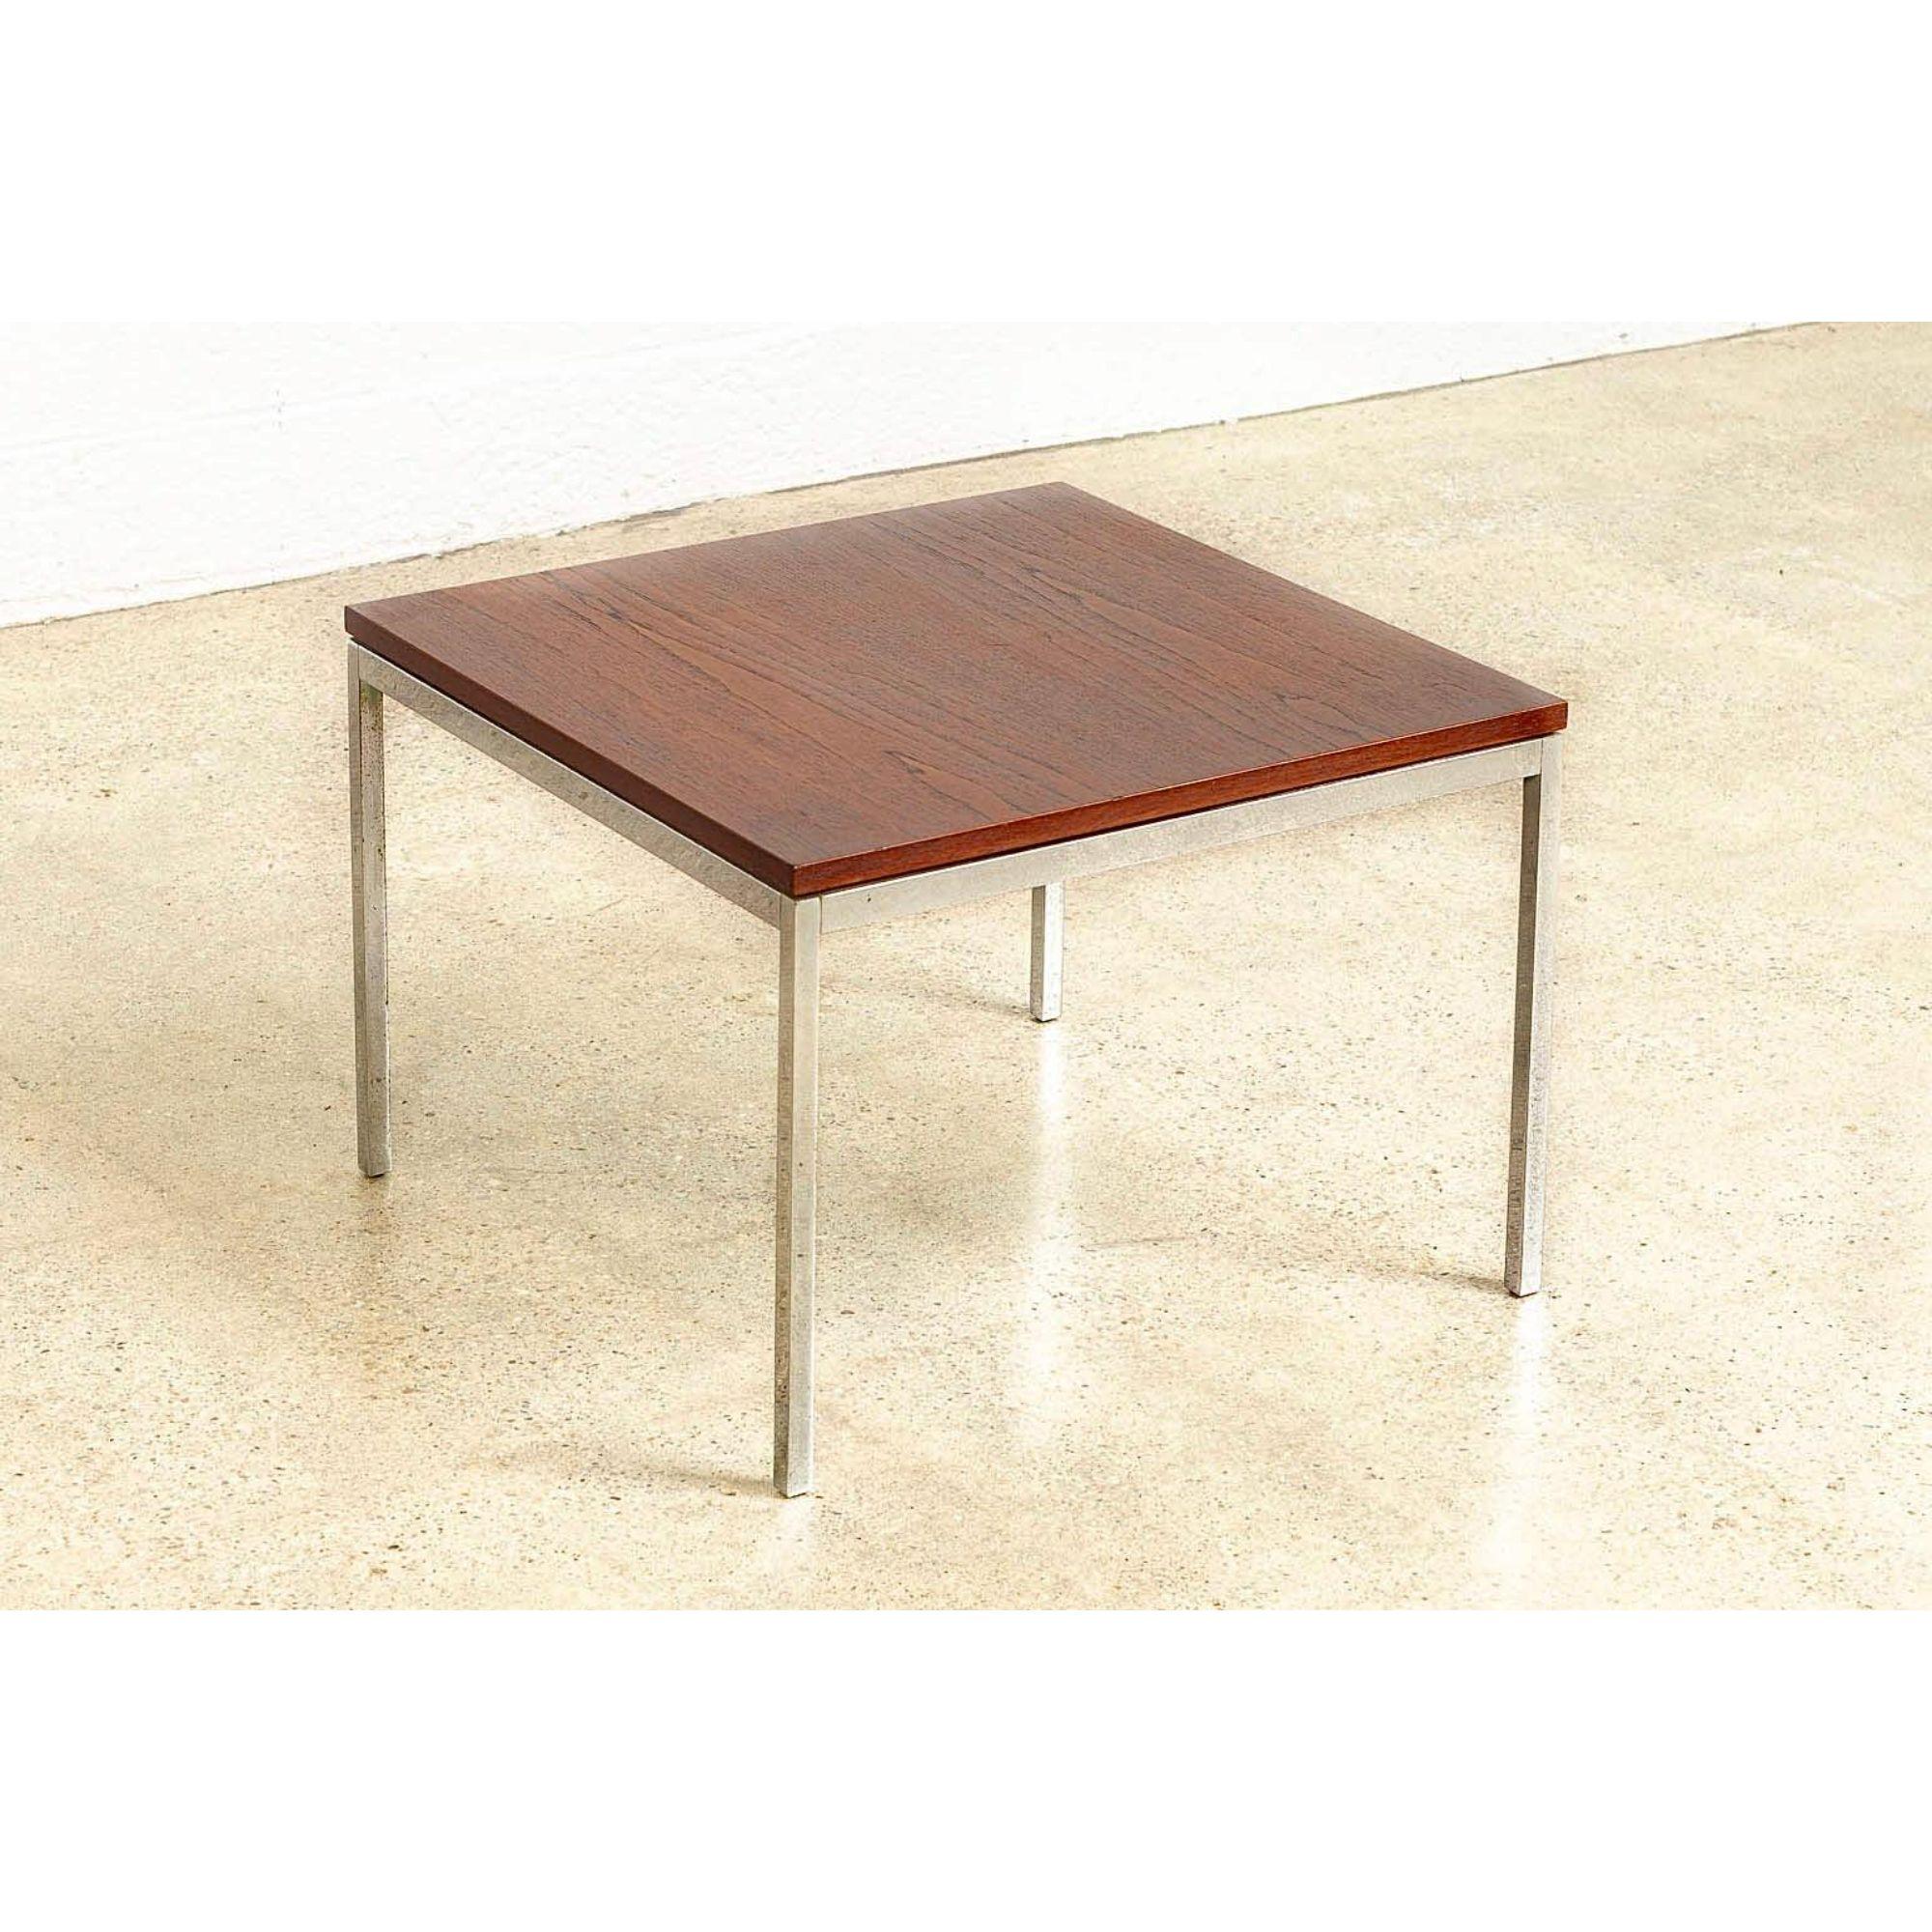 American 1960s Midcentury Florence Knoll Square Coffee Table in Walnut